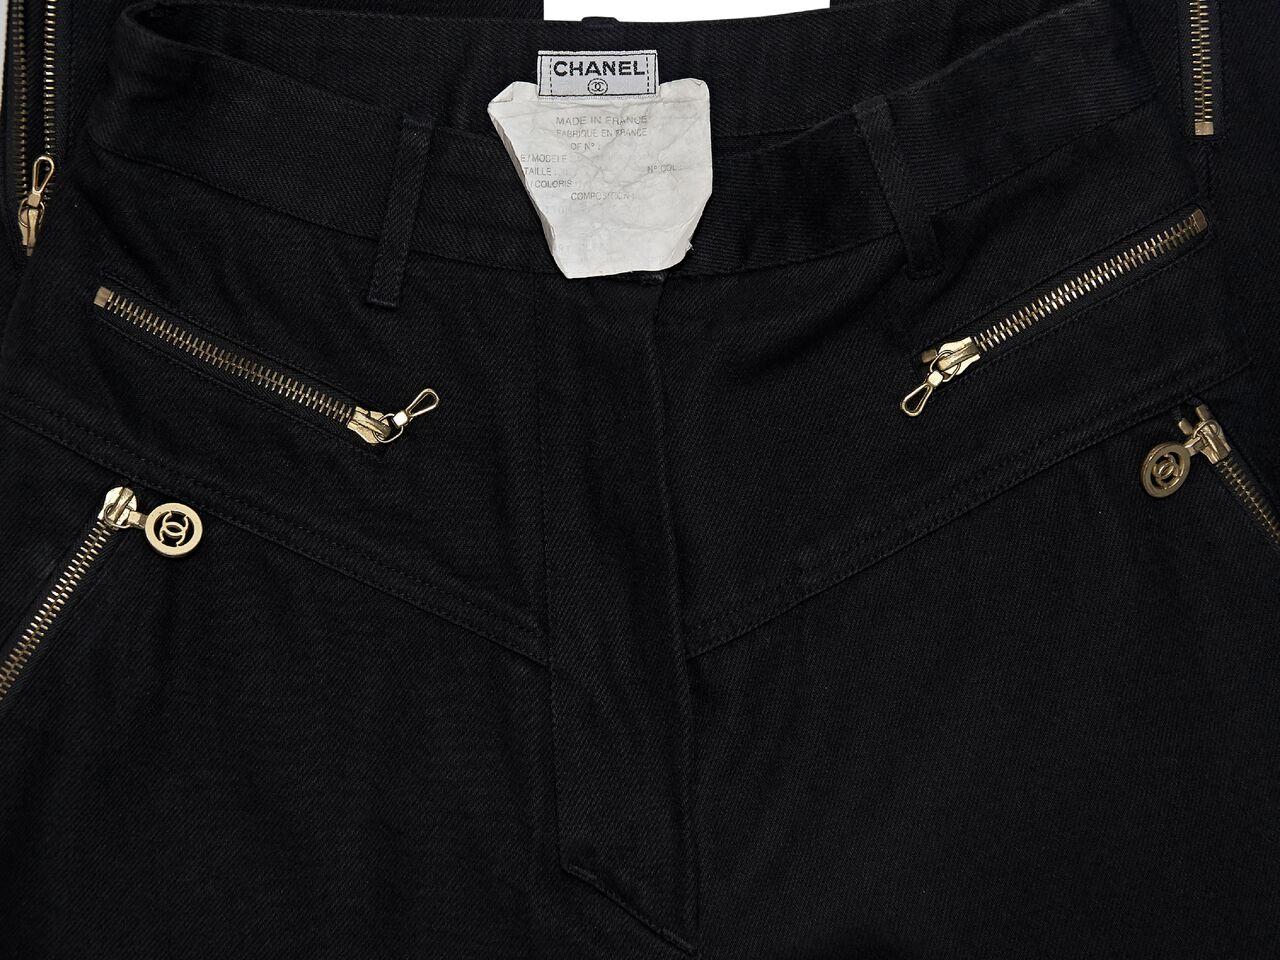 Product details:  Vintage black denim pants by Chanel.  Banded waist with belt loops.  Button and zip fly closure.  Front zip pockets.  Back patch pockets.  Zip hem.  Goldtone hardware.  26.5